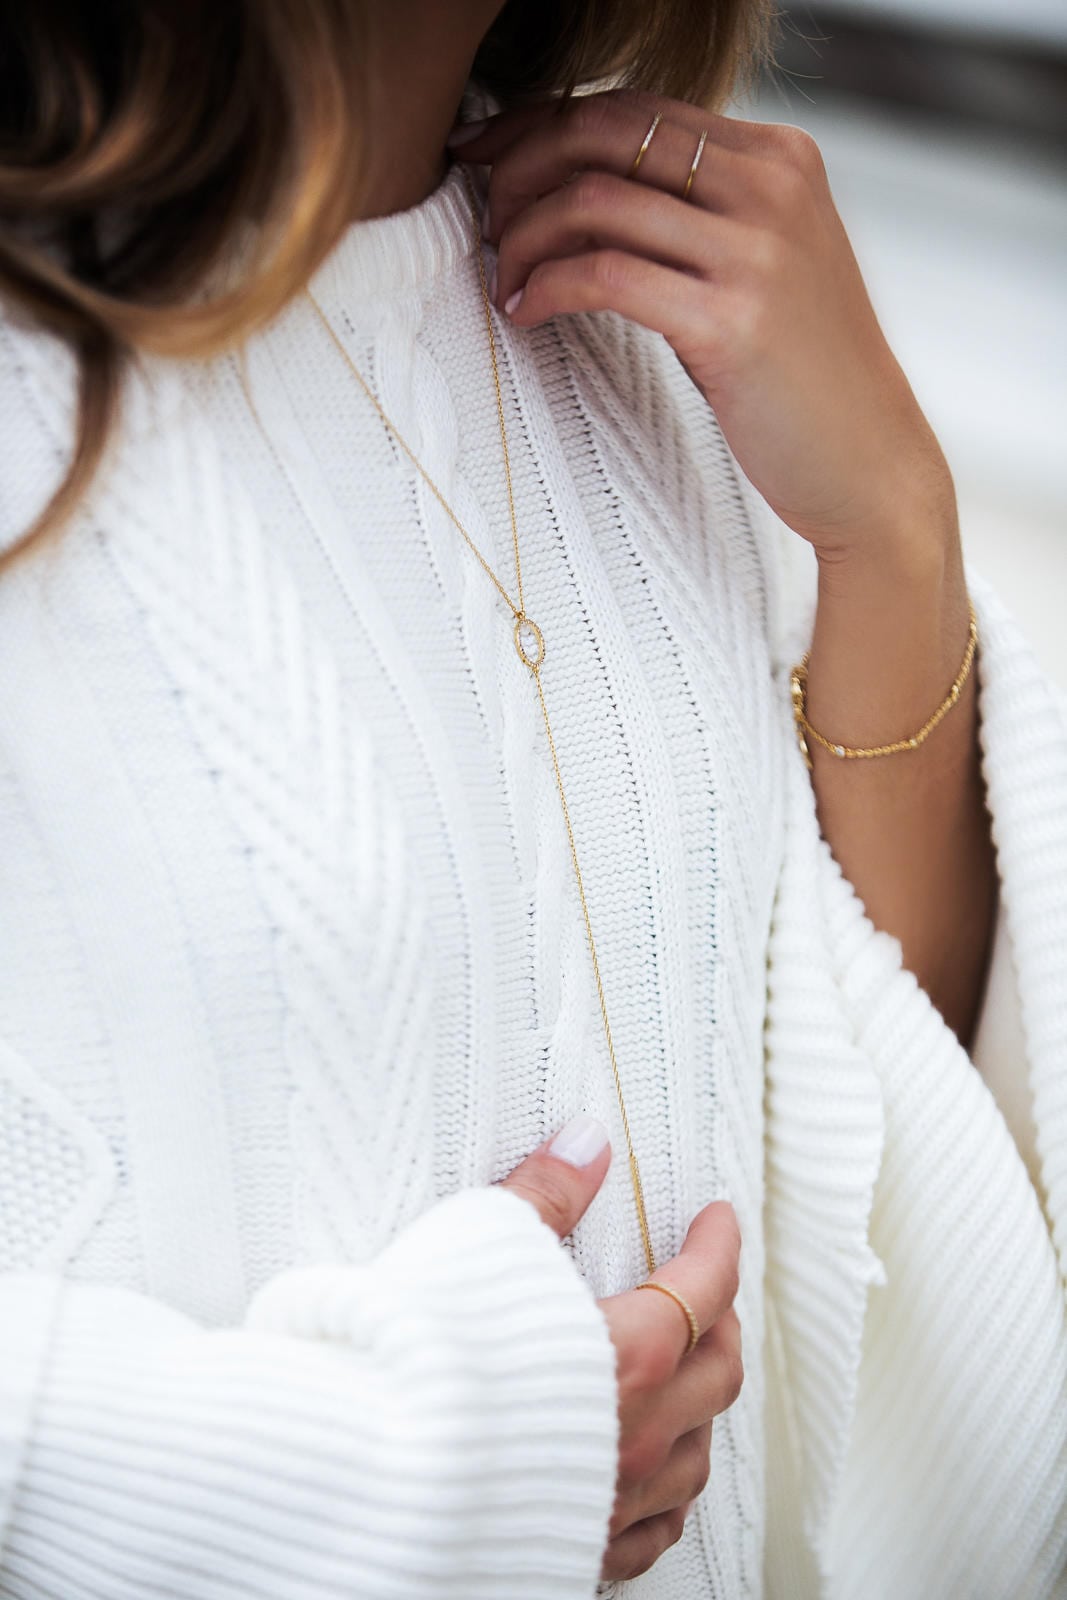 How To Style Dainty Jewelry | The Girl From Panama